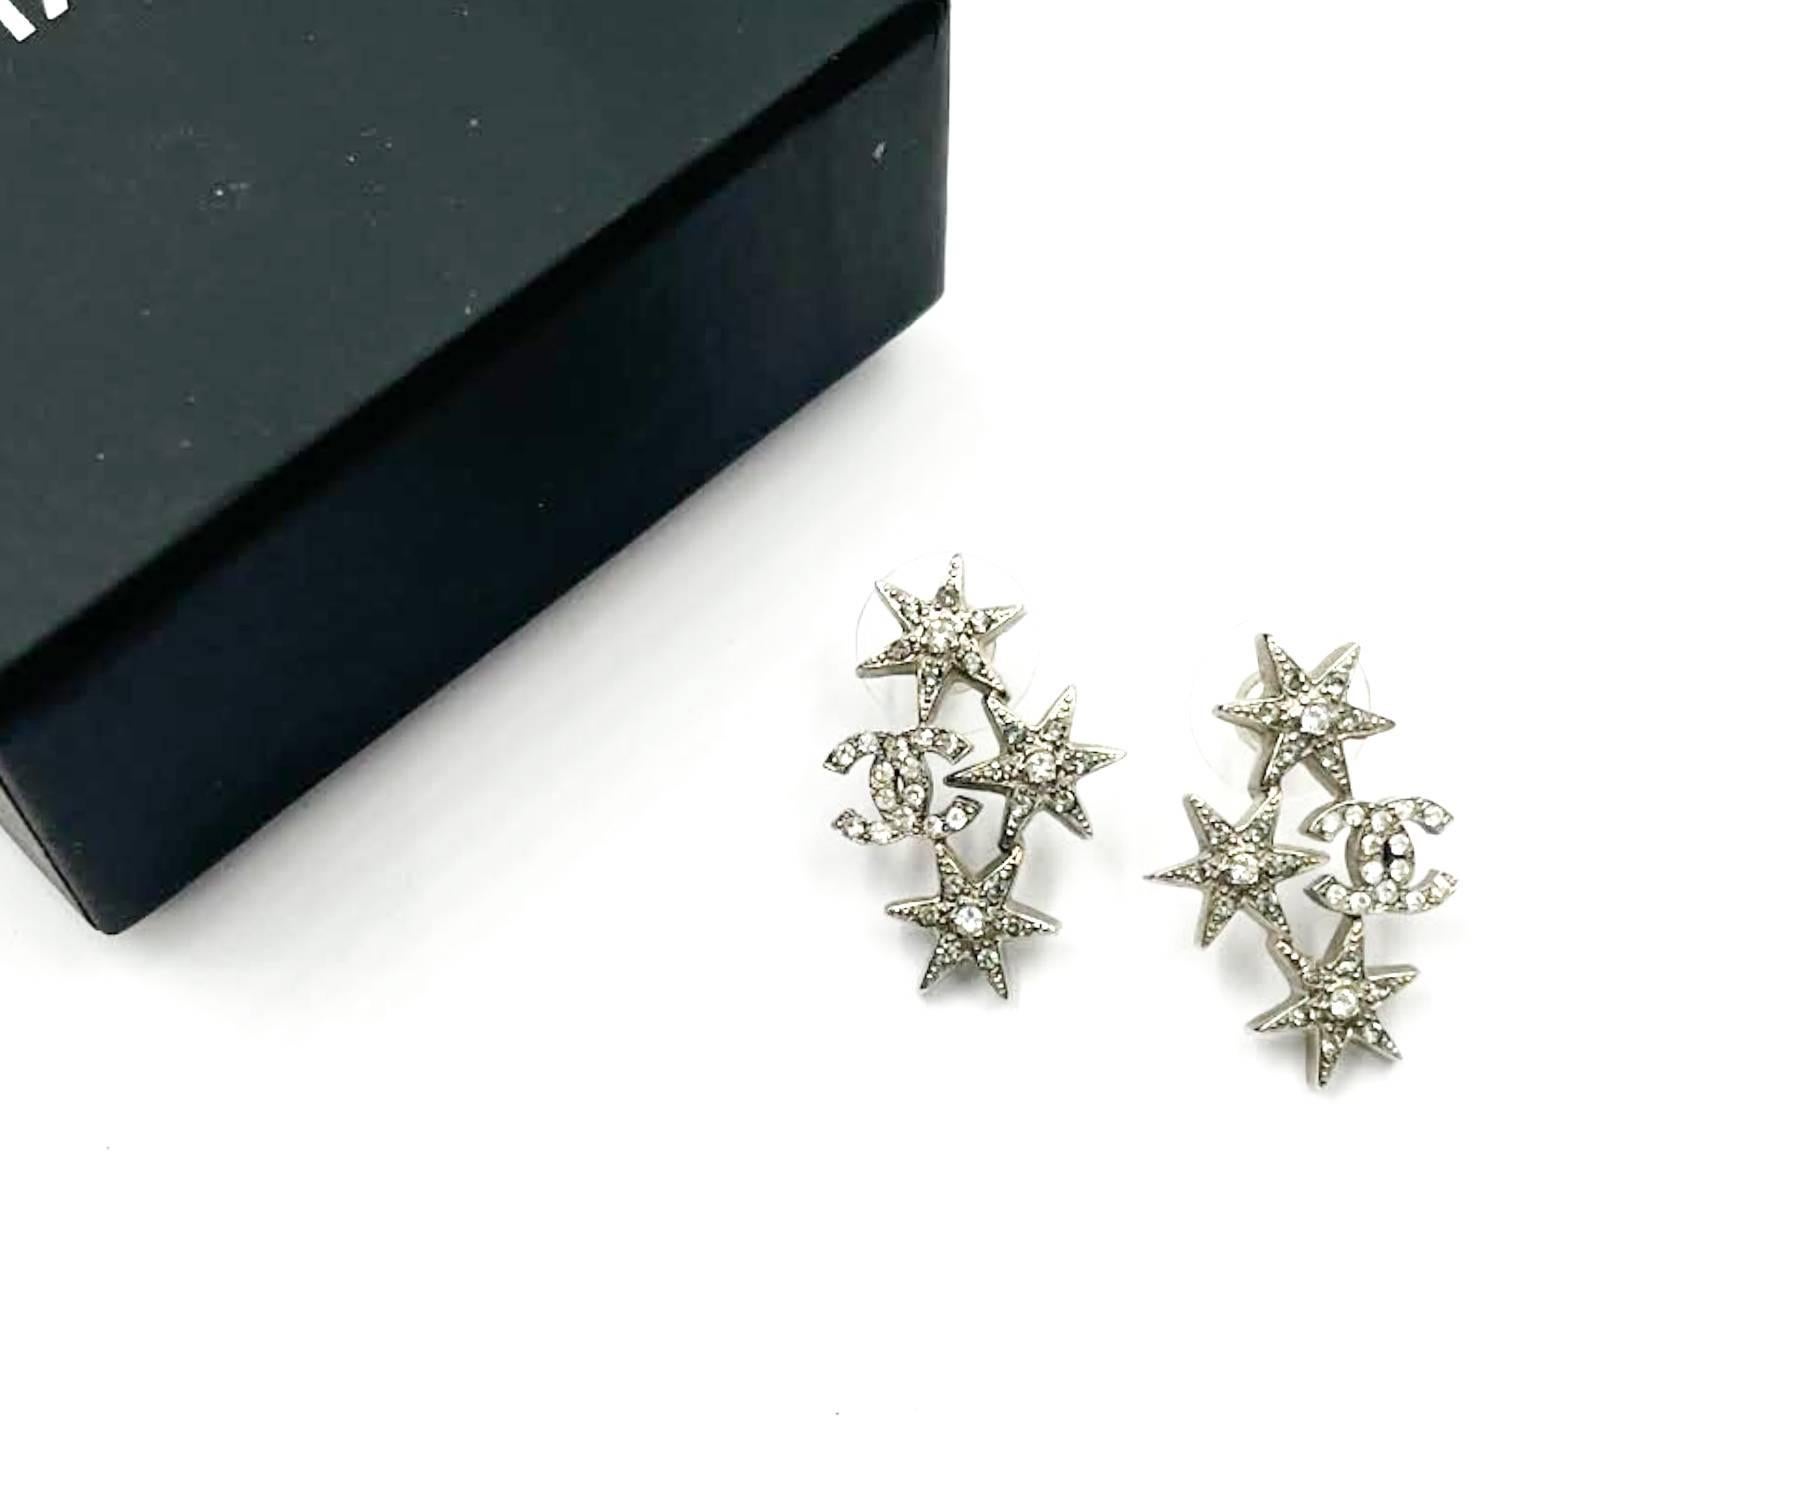 Chanel Silver CC Star Cluster Crystal Piercing Earrings

* Marked 16
* Made in France
* Comes with the original box and pouch

-Approximately 1